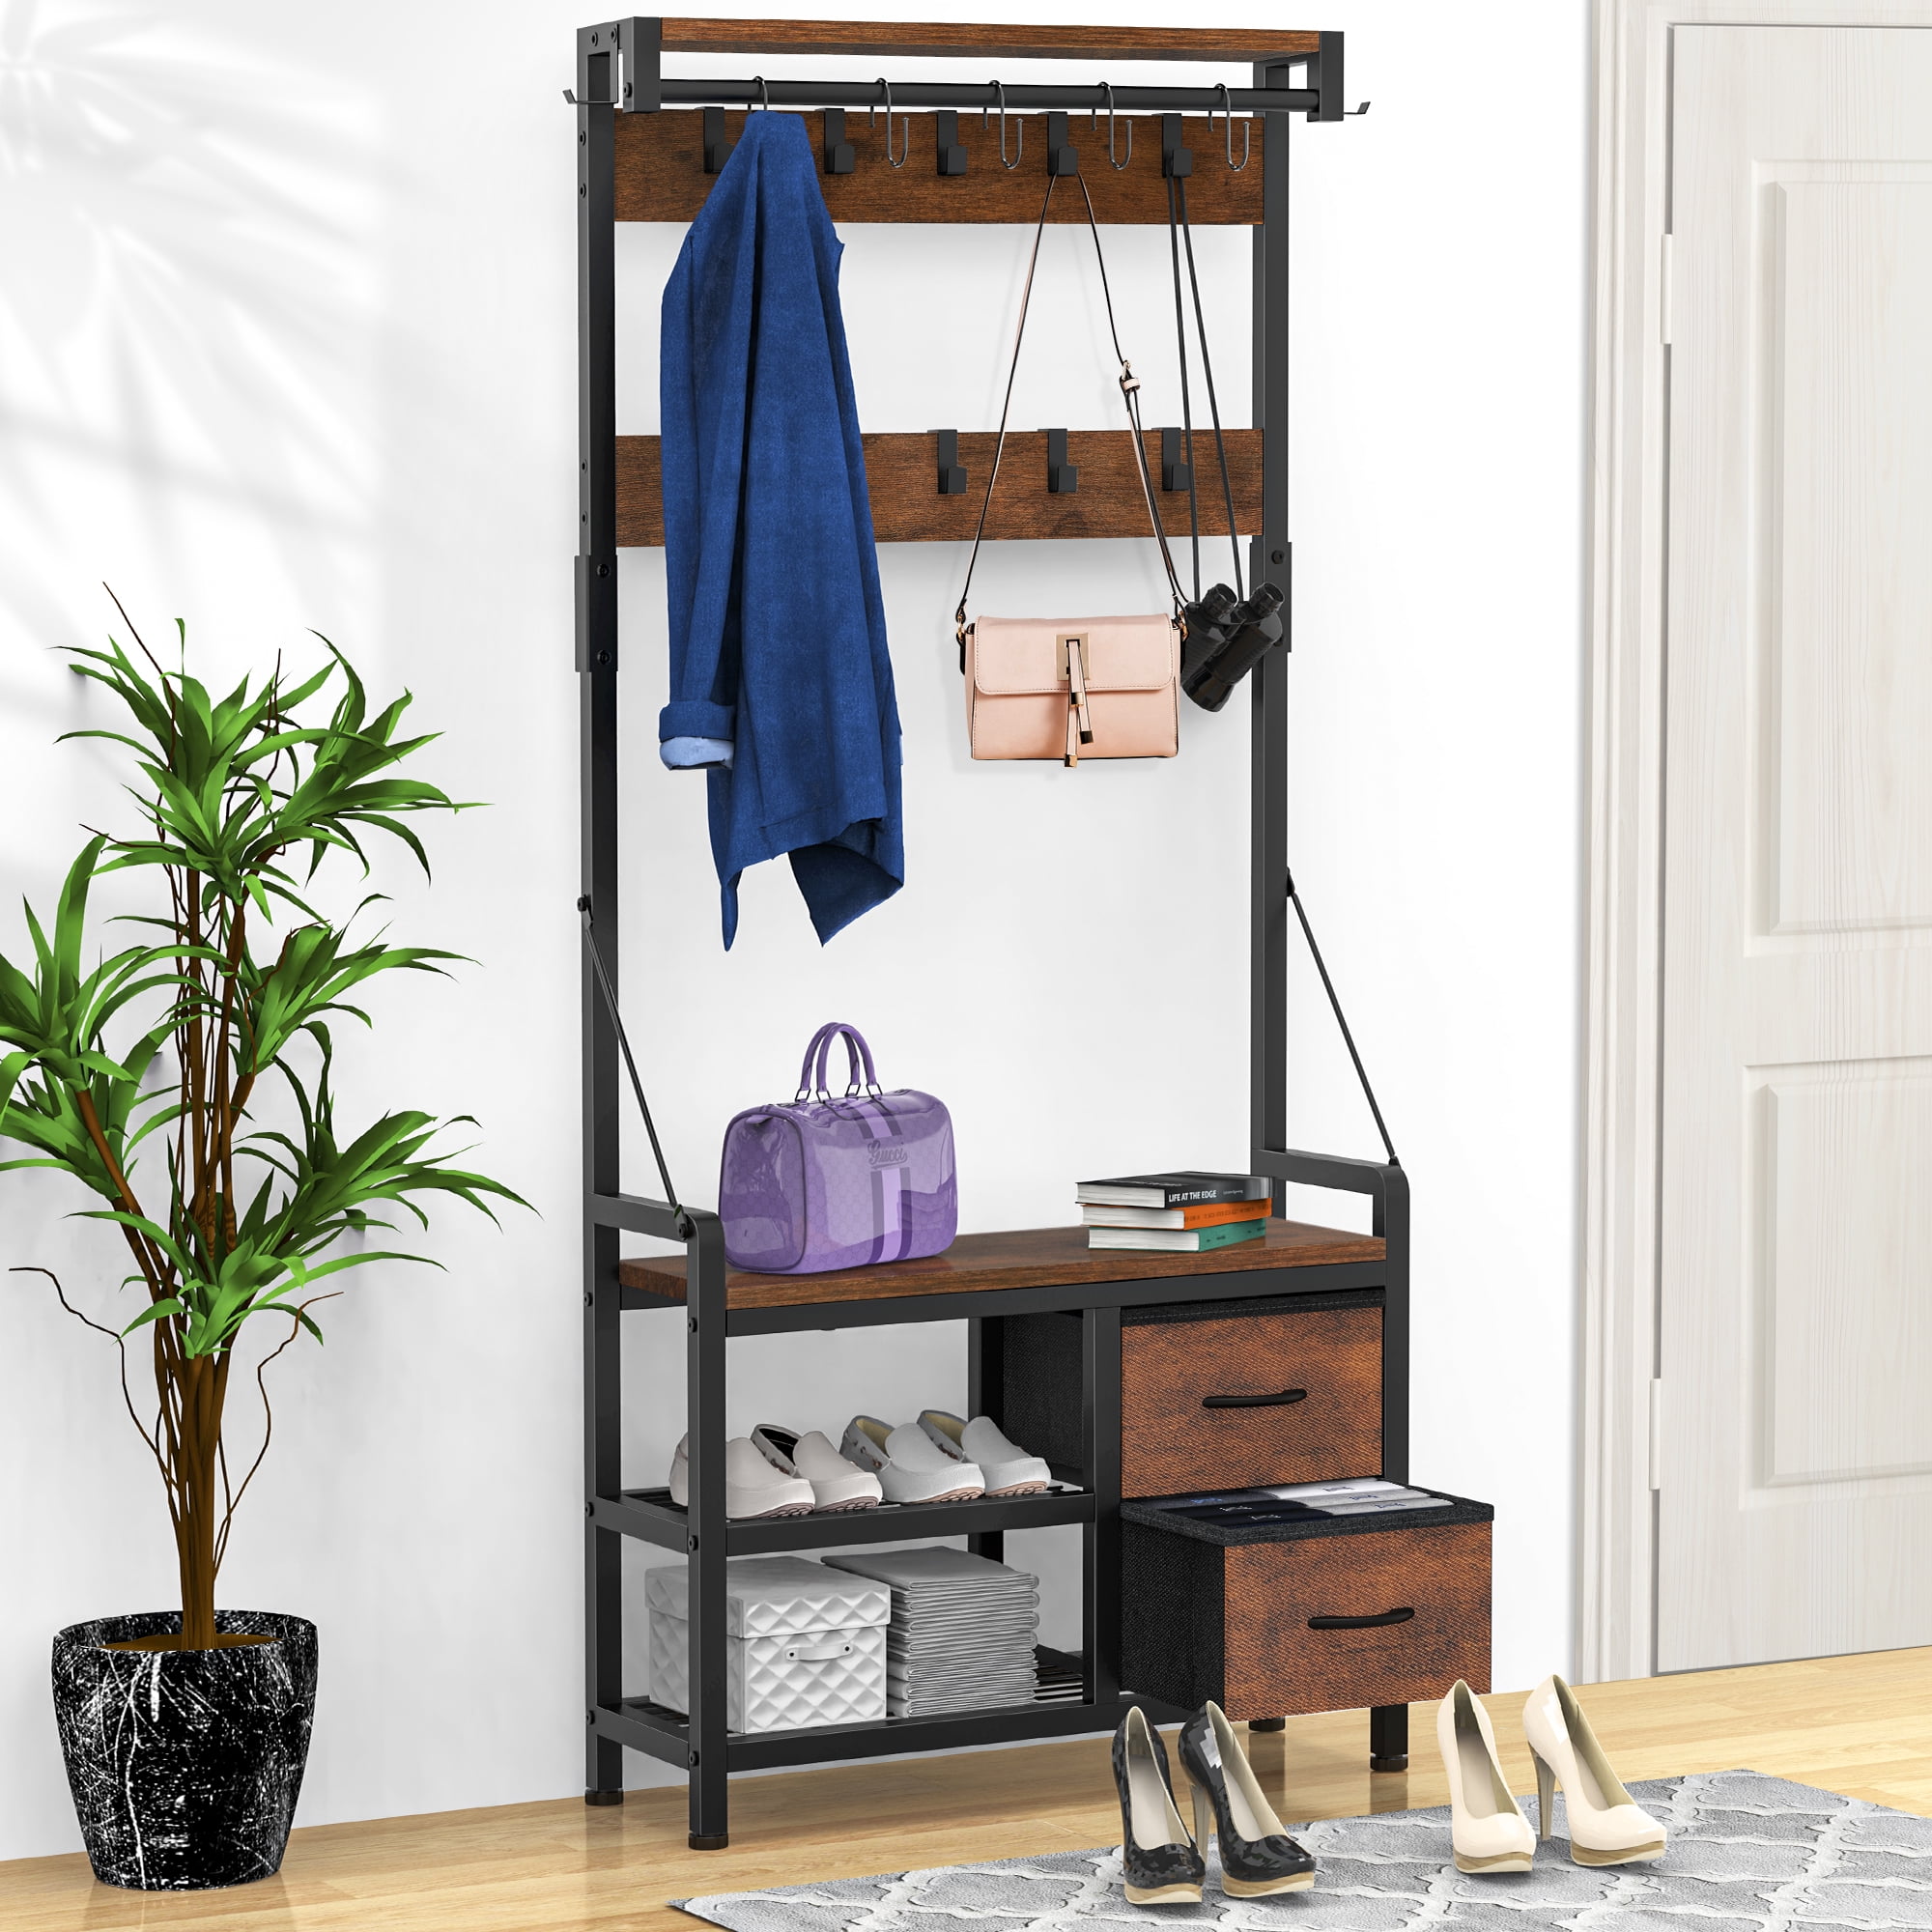 4-in-1 Entryway Hall Tree with Side Storage Shelves 17 Stories